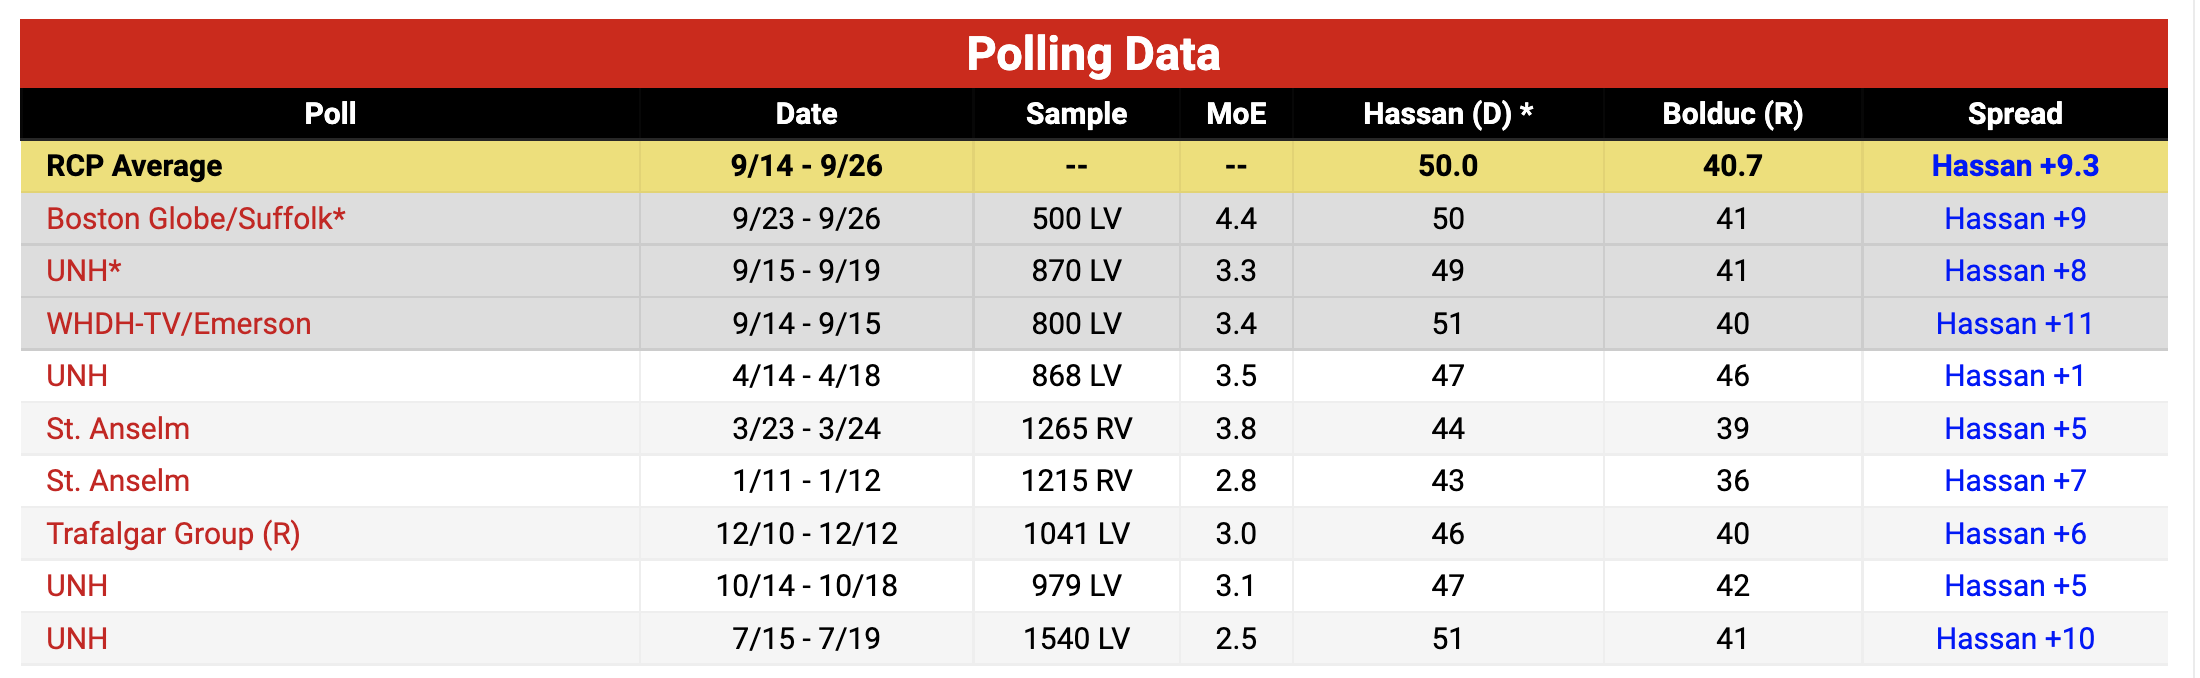 Screen-Shot-2022-09-29-at-12.20.10-PM Polling From Swing State Has Democrat Up 8+ On MAGA Candidate Donald Trump Featured Politics Polls Top Stories 